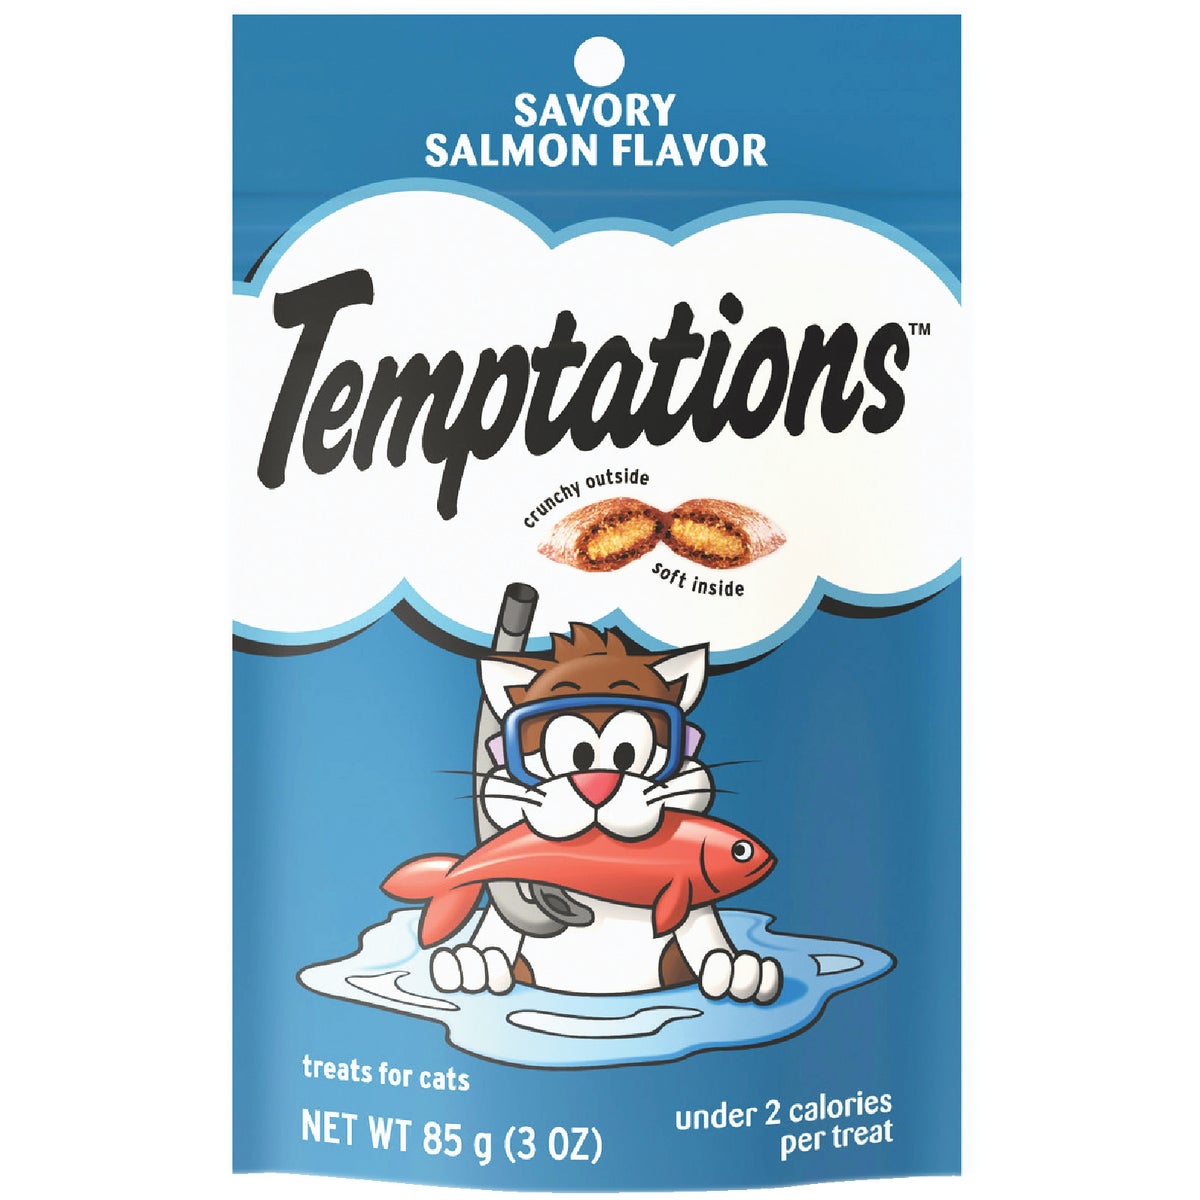 Item 819085, Delicious treats for cats.